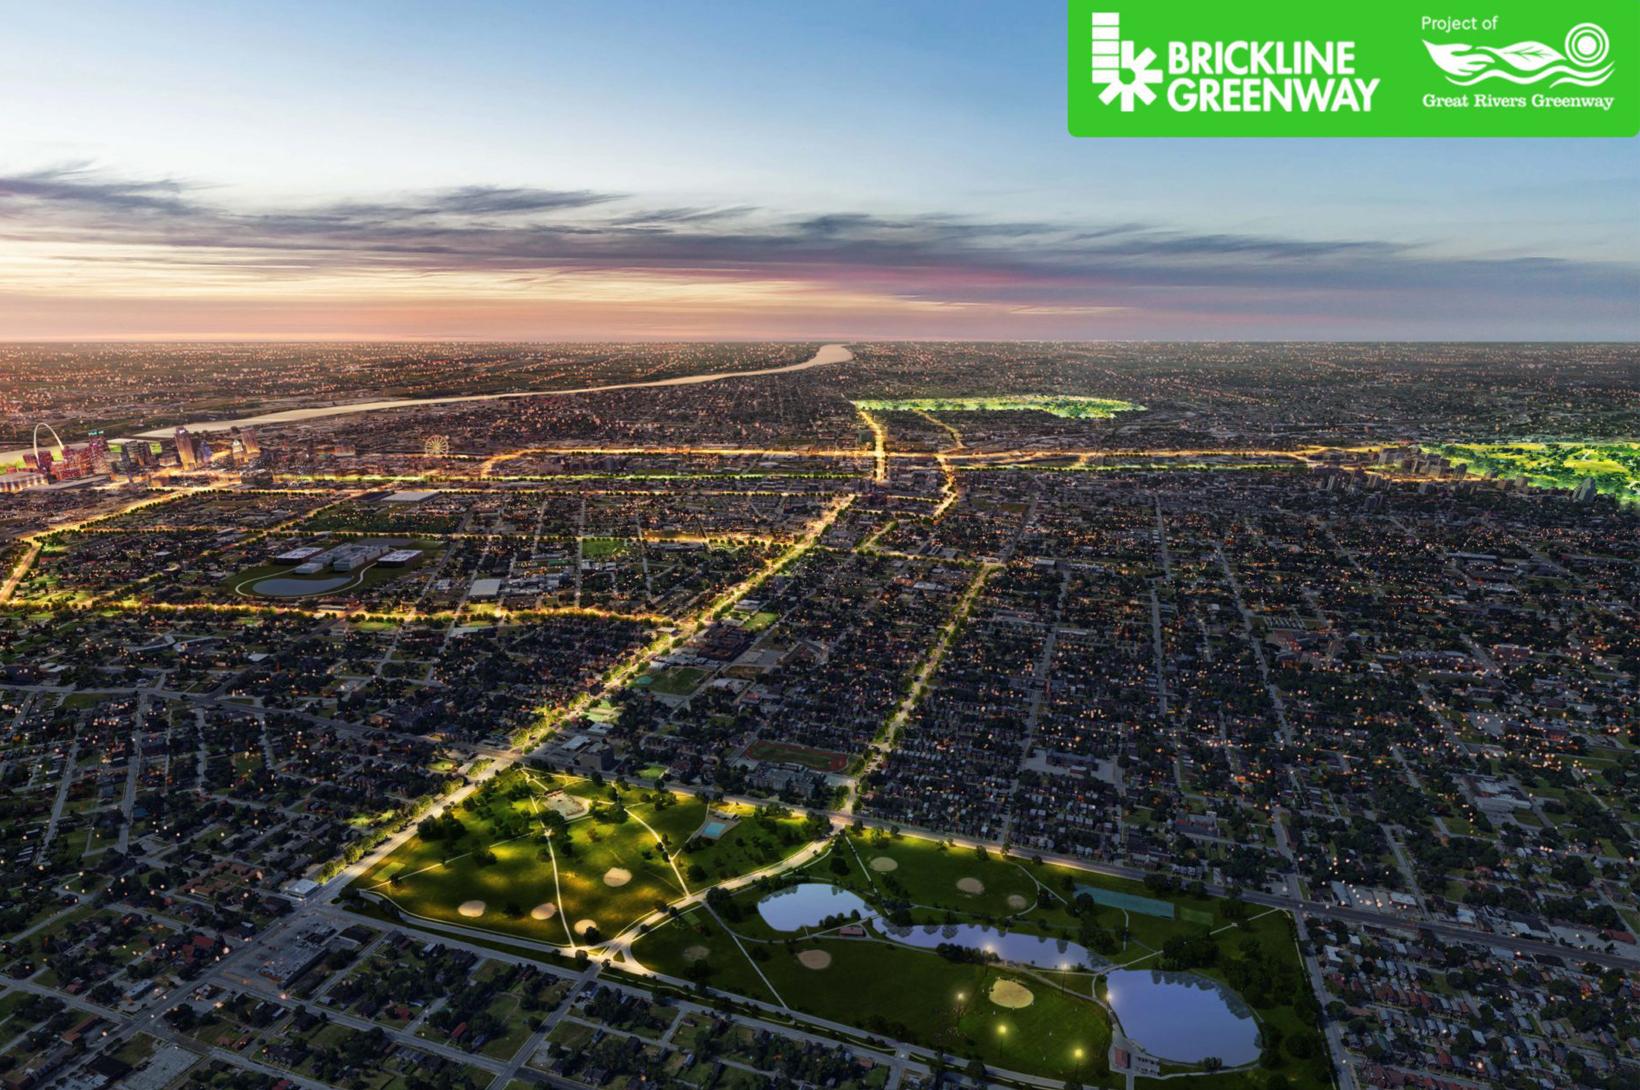 Aerial view of St. Louis City with an illuminated Brickline Greenway